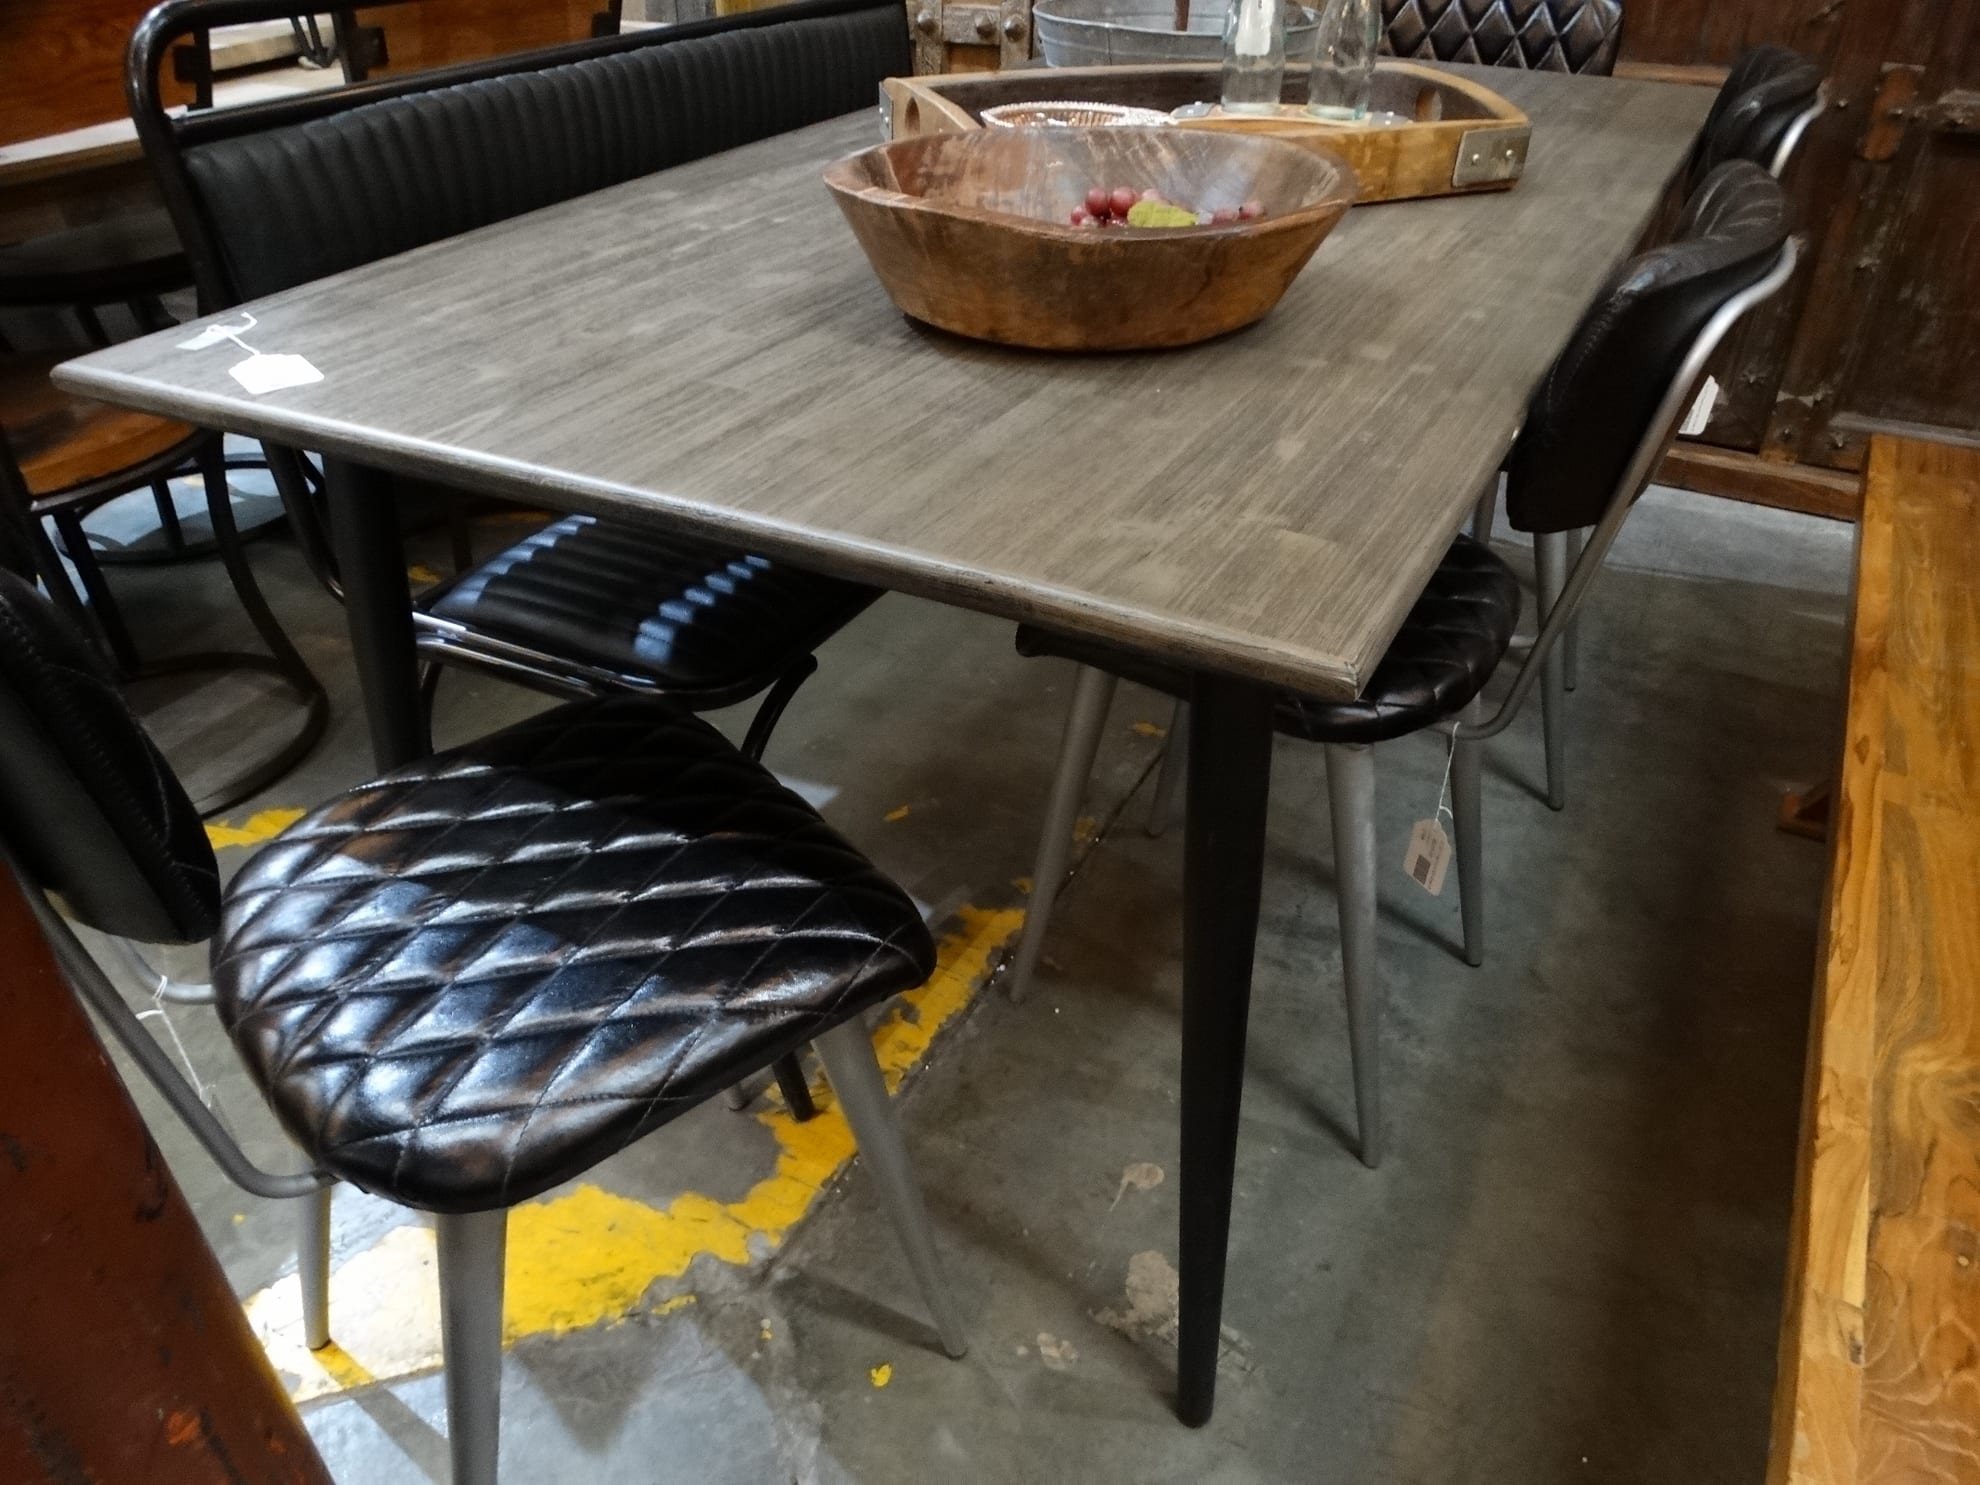 Wooden Dining Table Has A Textured Gray, Light Wood Dining Table With Metal Legs